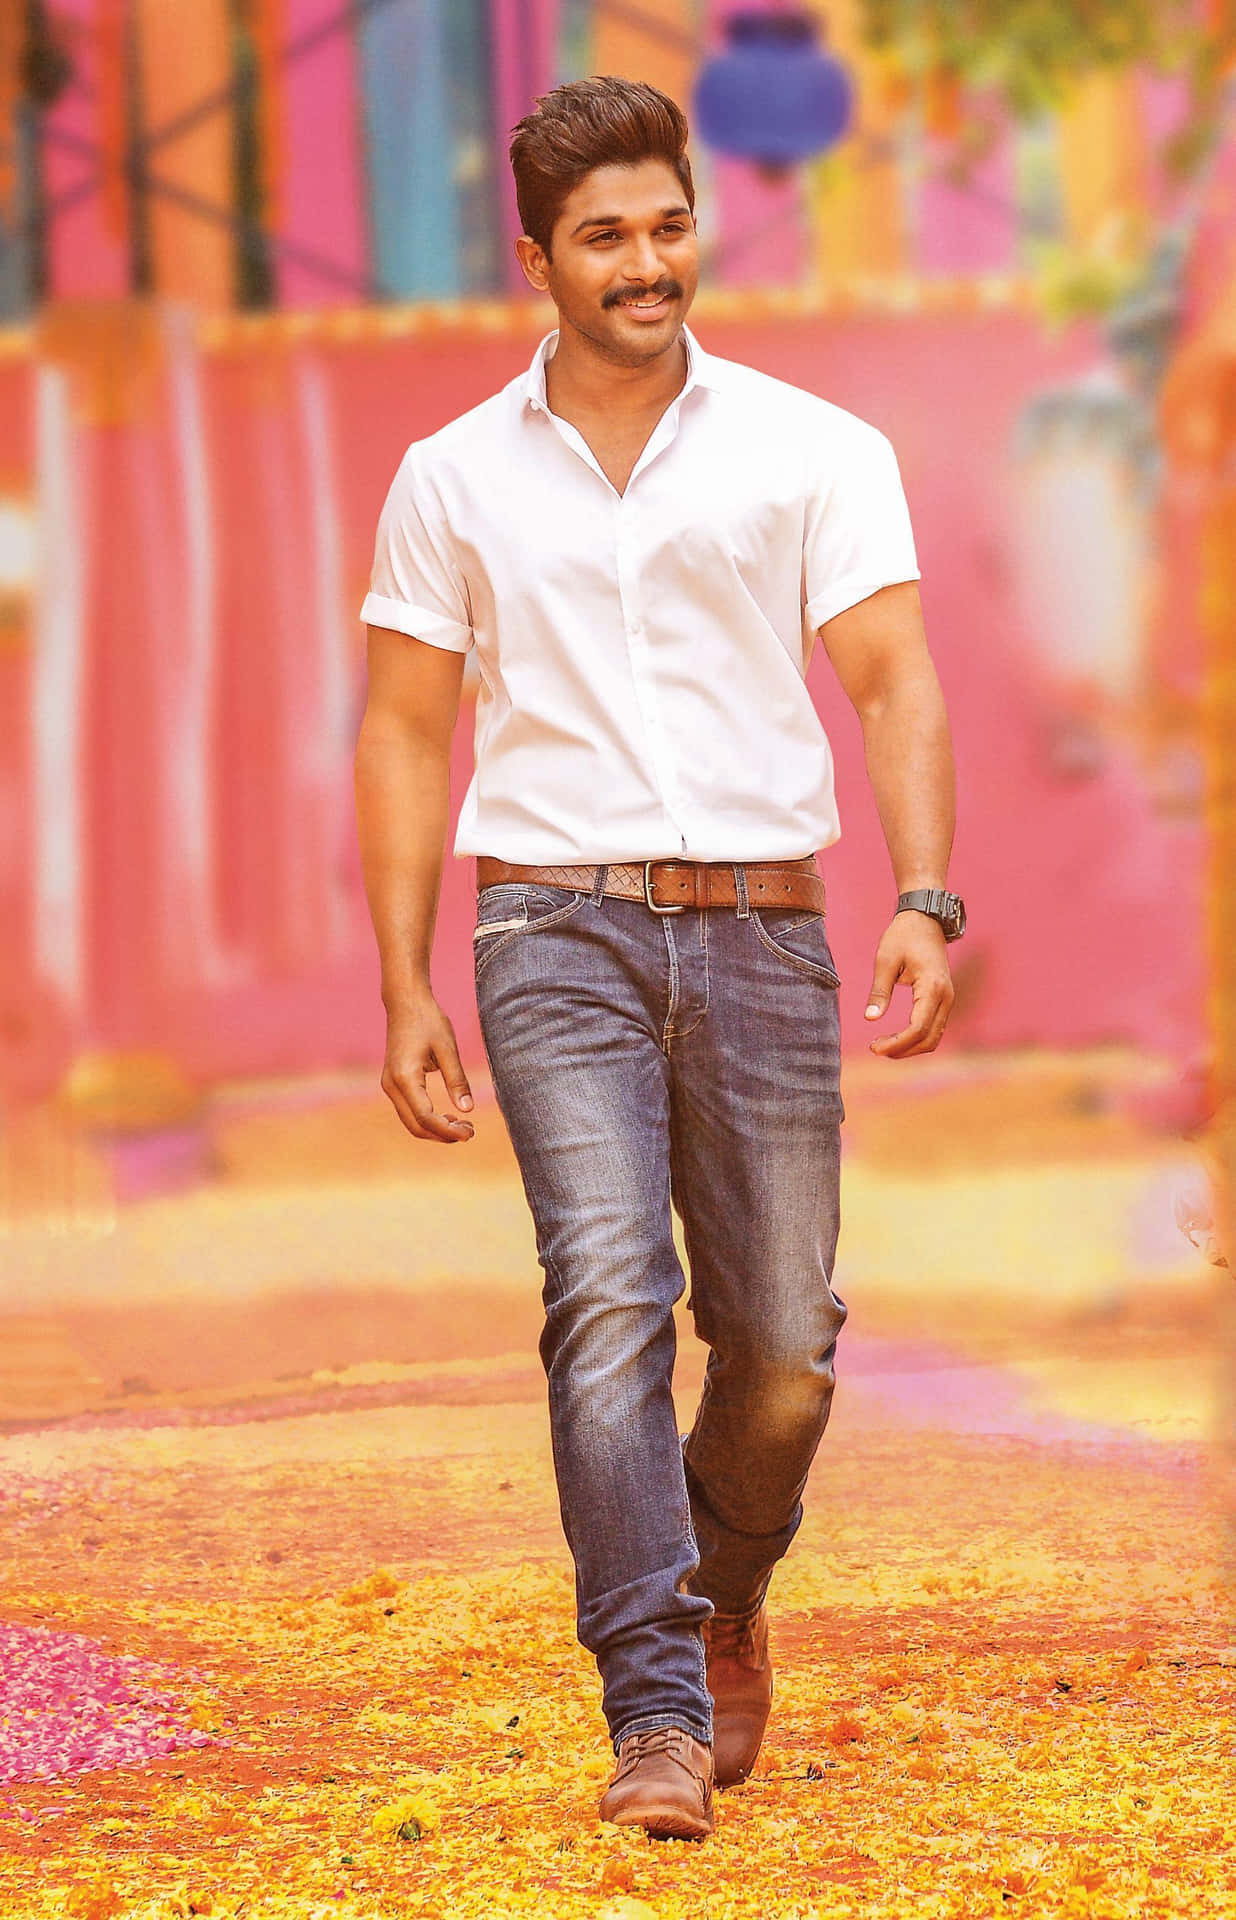 Allu Arjun, Actor And Star of Blockbuster South Indian Films